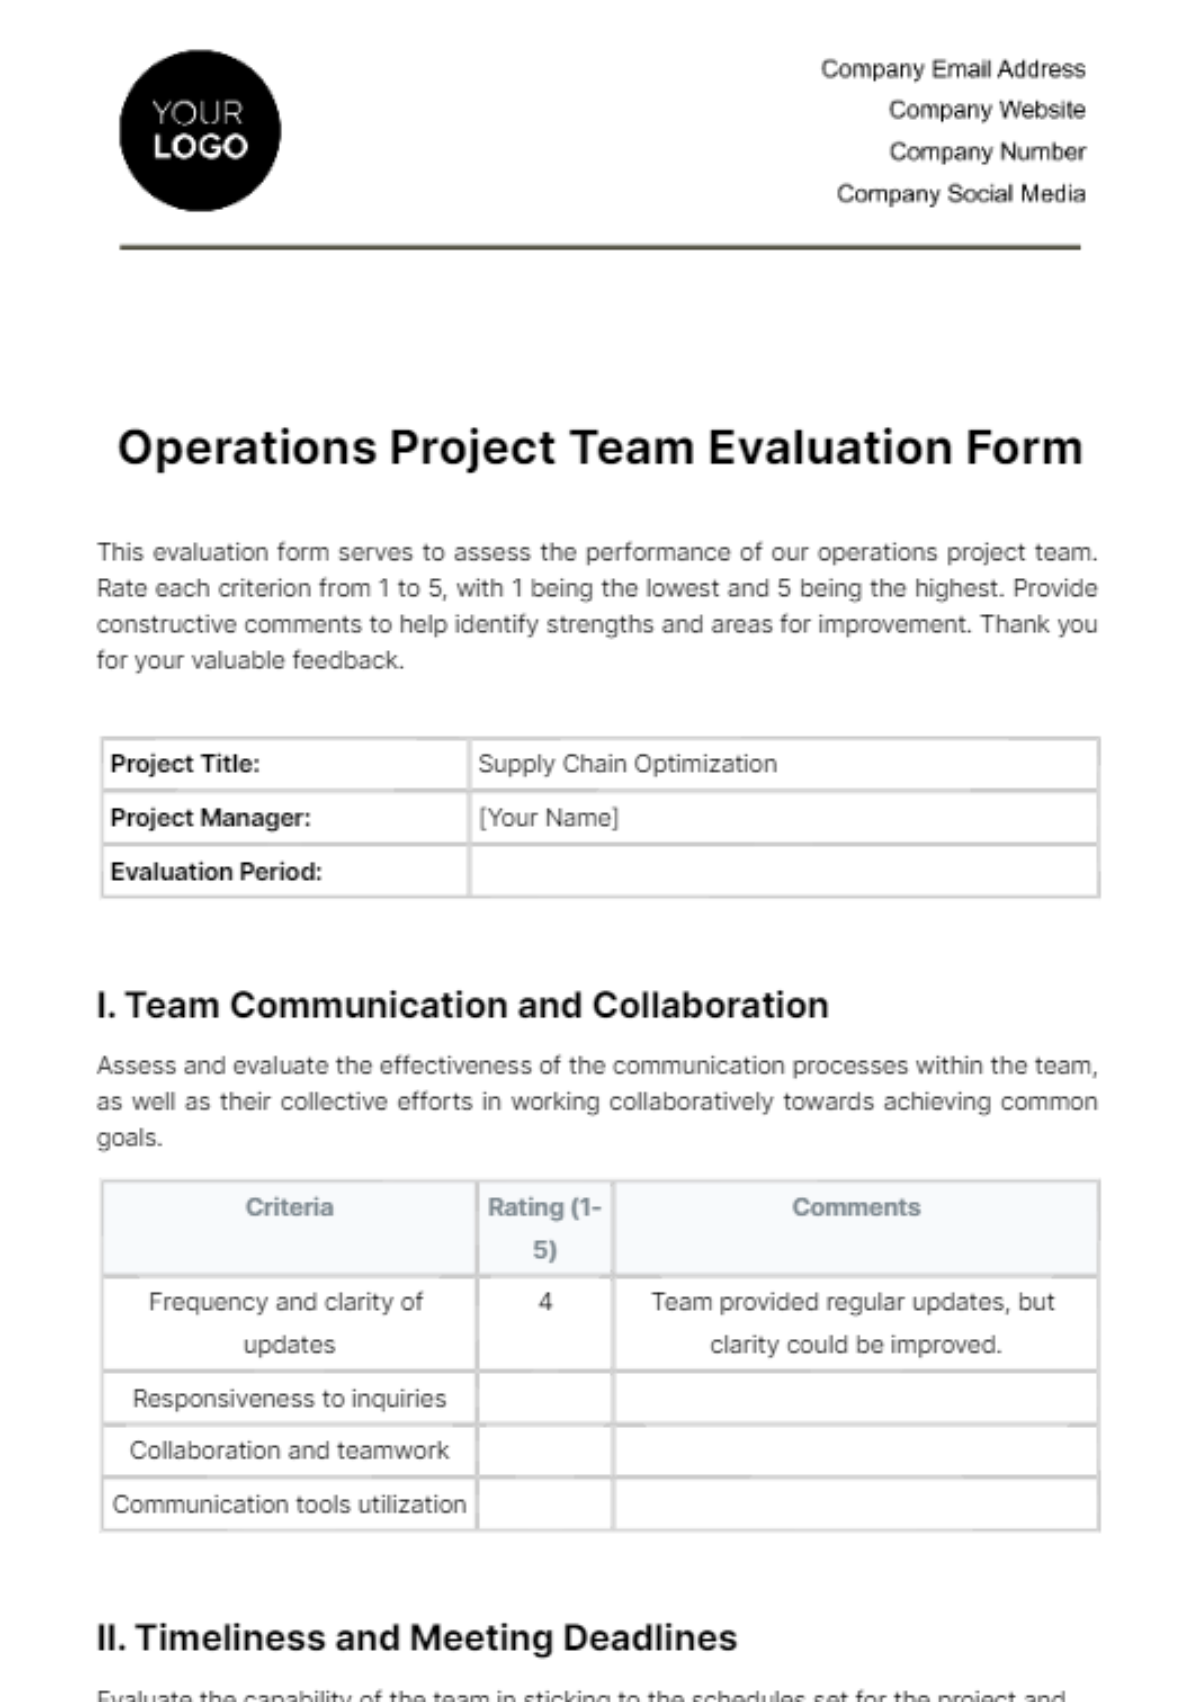 Free Operations Project Team Evaluation Form Template